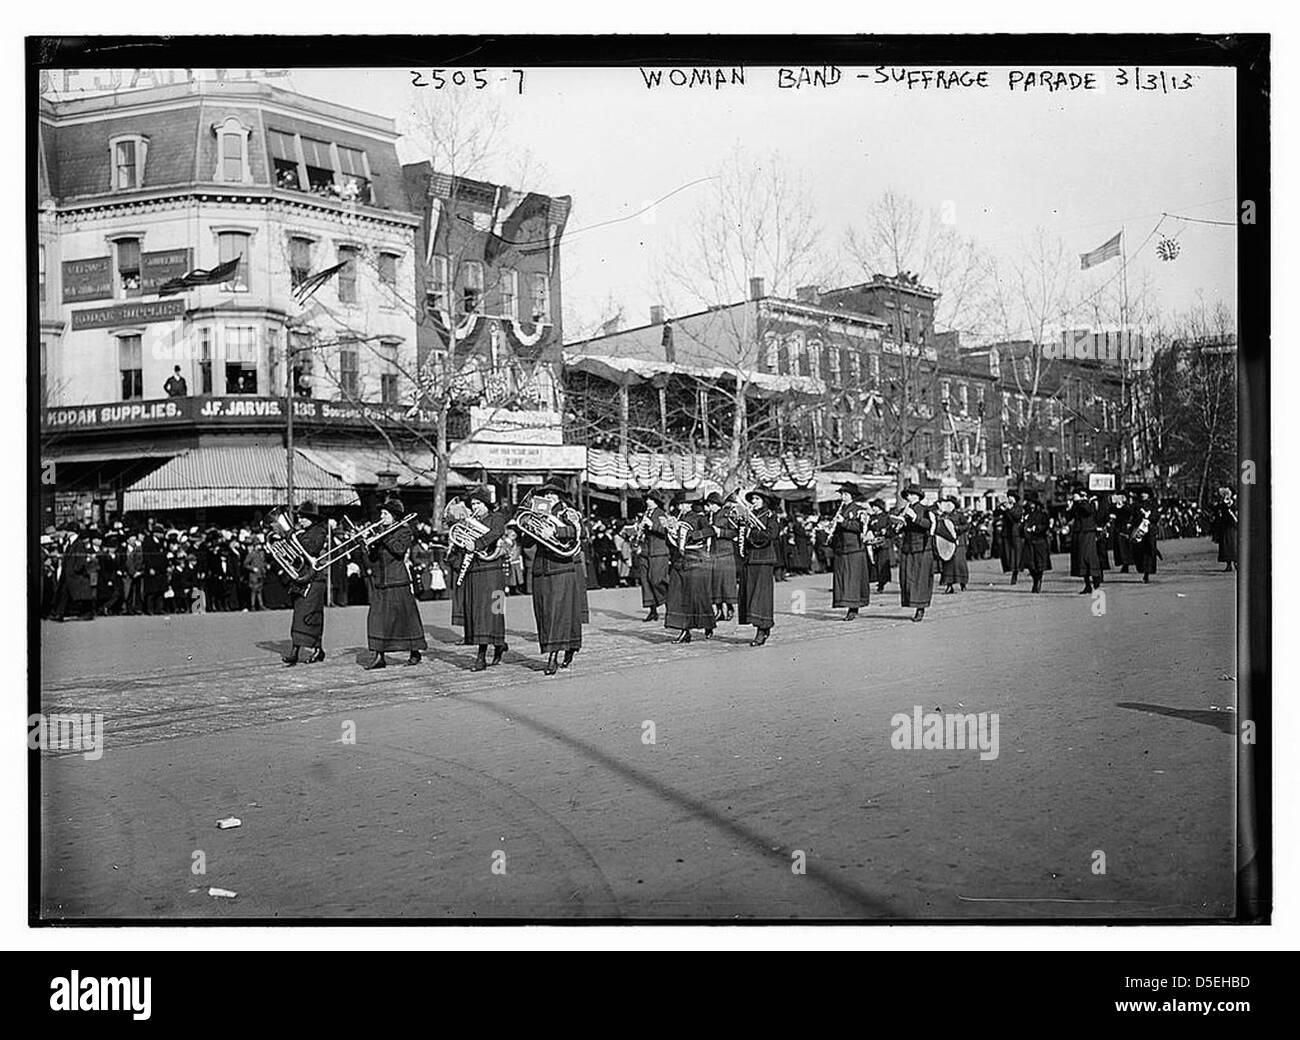 Woman band - Suffrage parade (LOC) Stock Photo